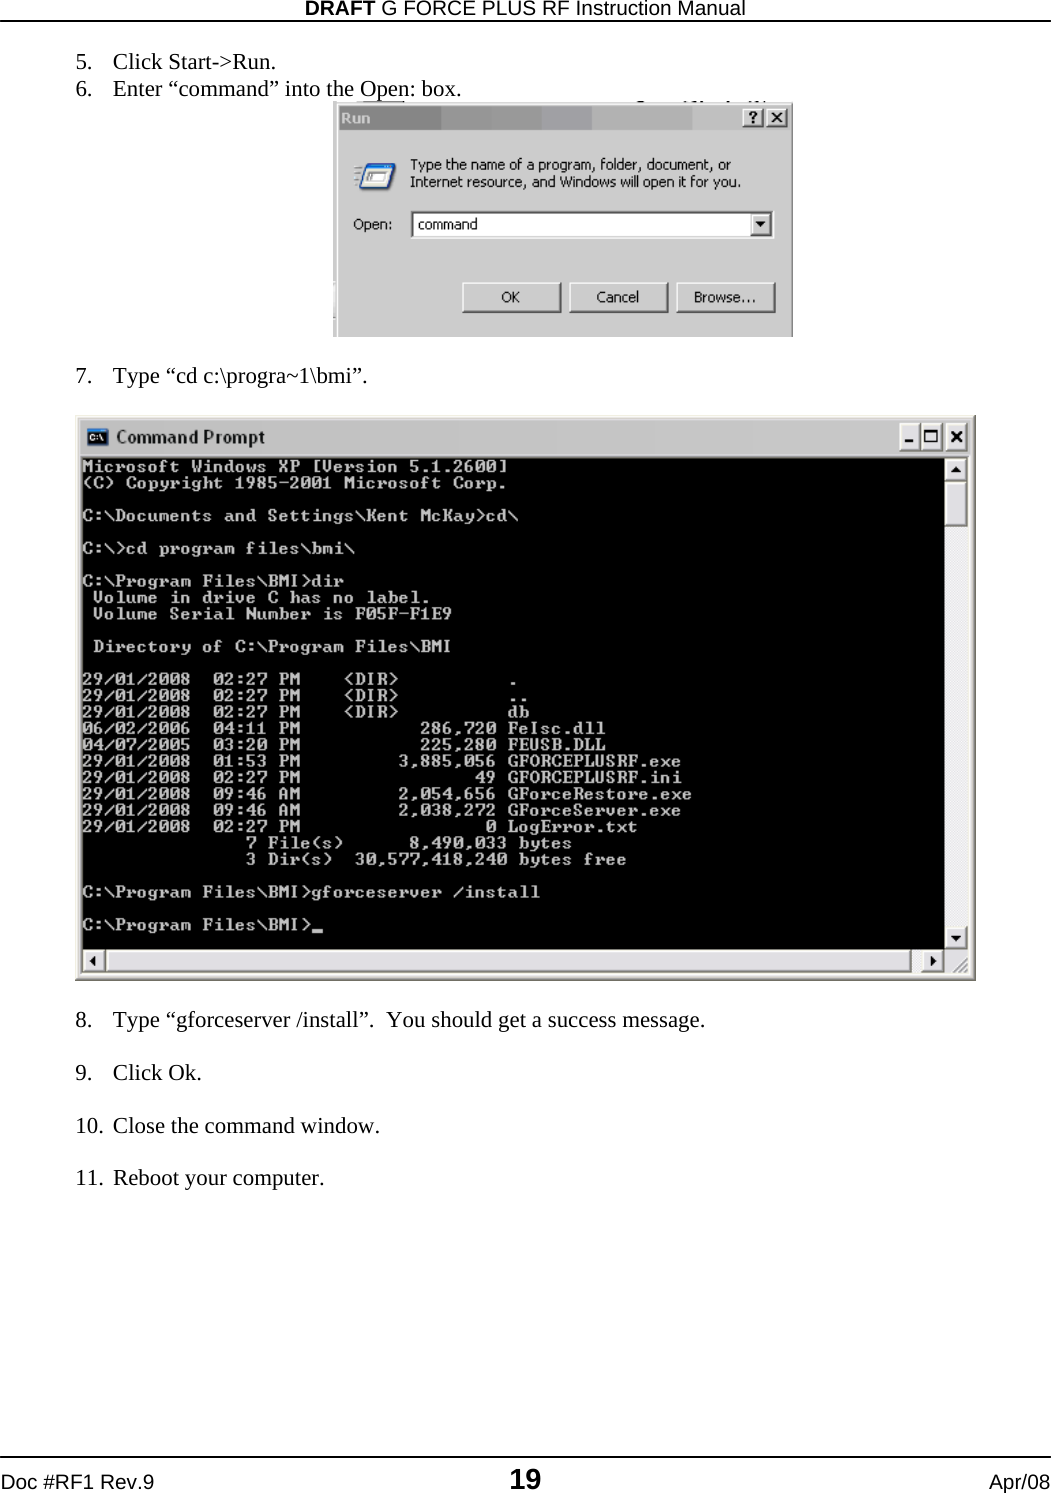 DRAFT G FORCE PLUS RF Instruction Manual   Doc #RF1 Rev.9  19  Apr/08 5. Click Start-&gt;Run. 6. Enter “command” into the Open: box.   7. Type “cd c:\progra~1\bmi”.    8. Type “gforceserver /install”.  You should get a success message.  9. Click Ok.  10. Close the command window.  11. Reboot your computer. 